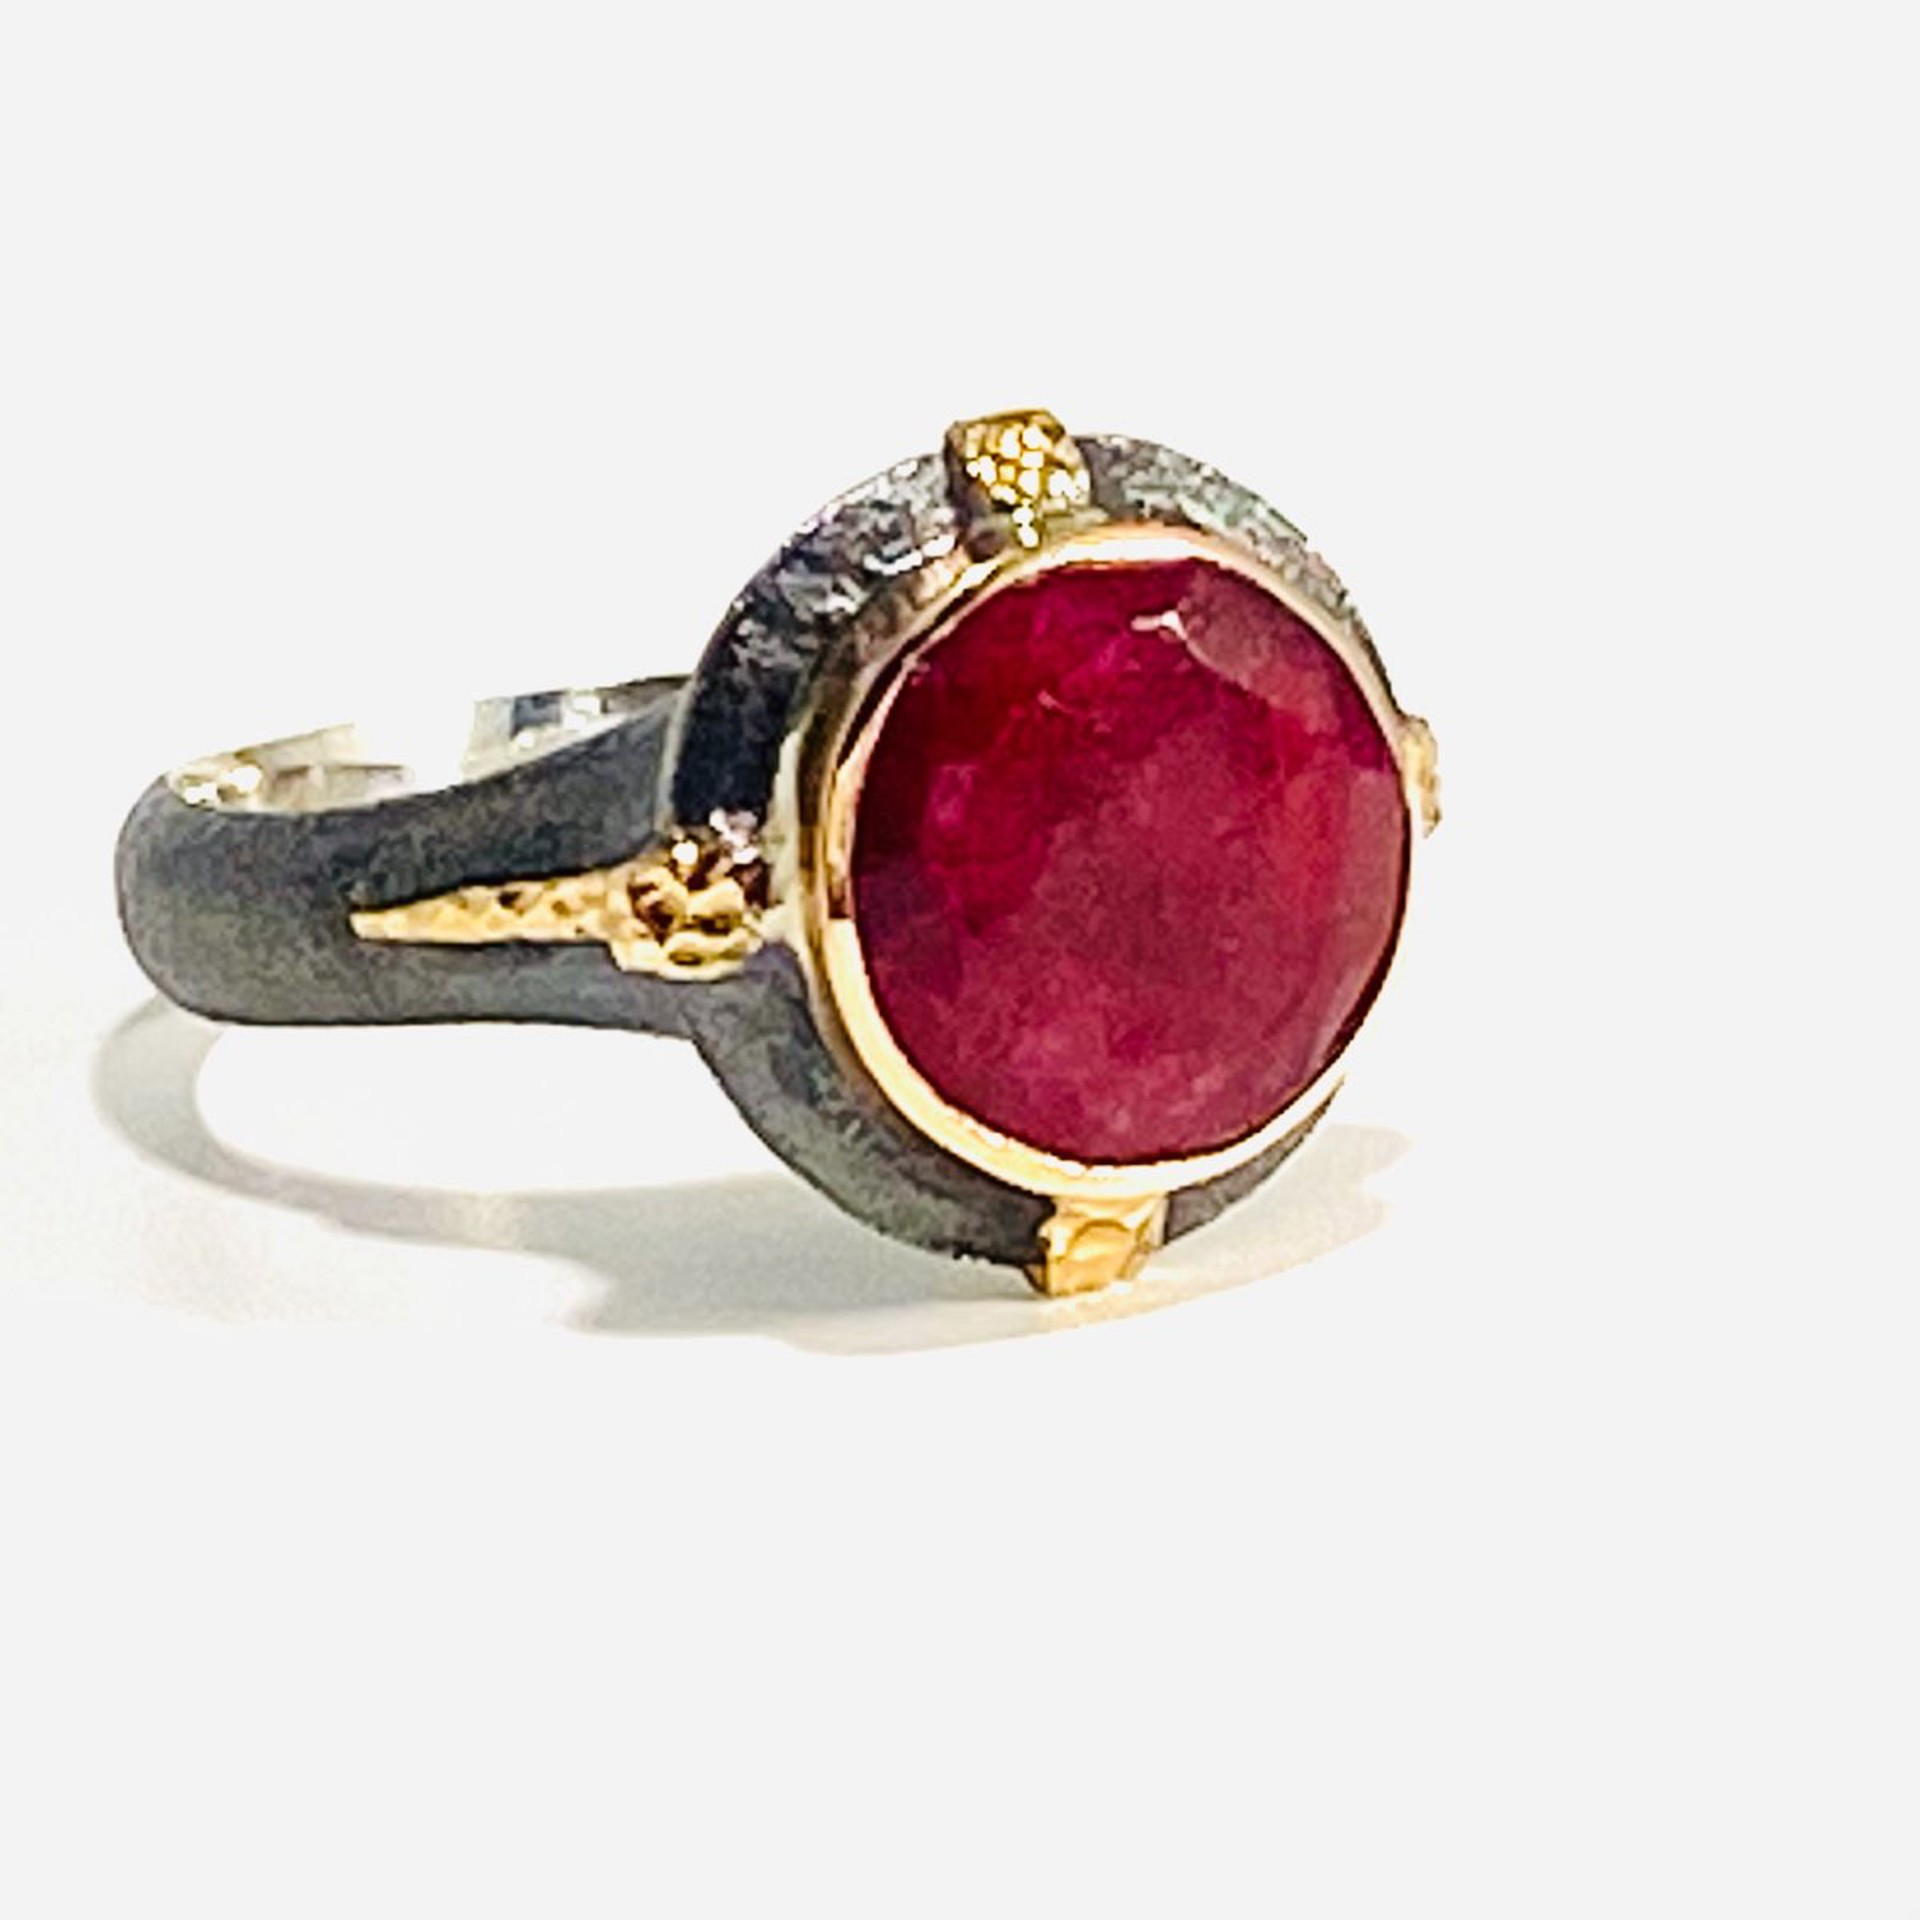 Bora22-21 Ring sz10.25 Faceted Round Indian Ruby by Bora